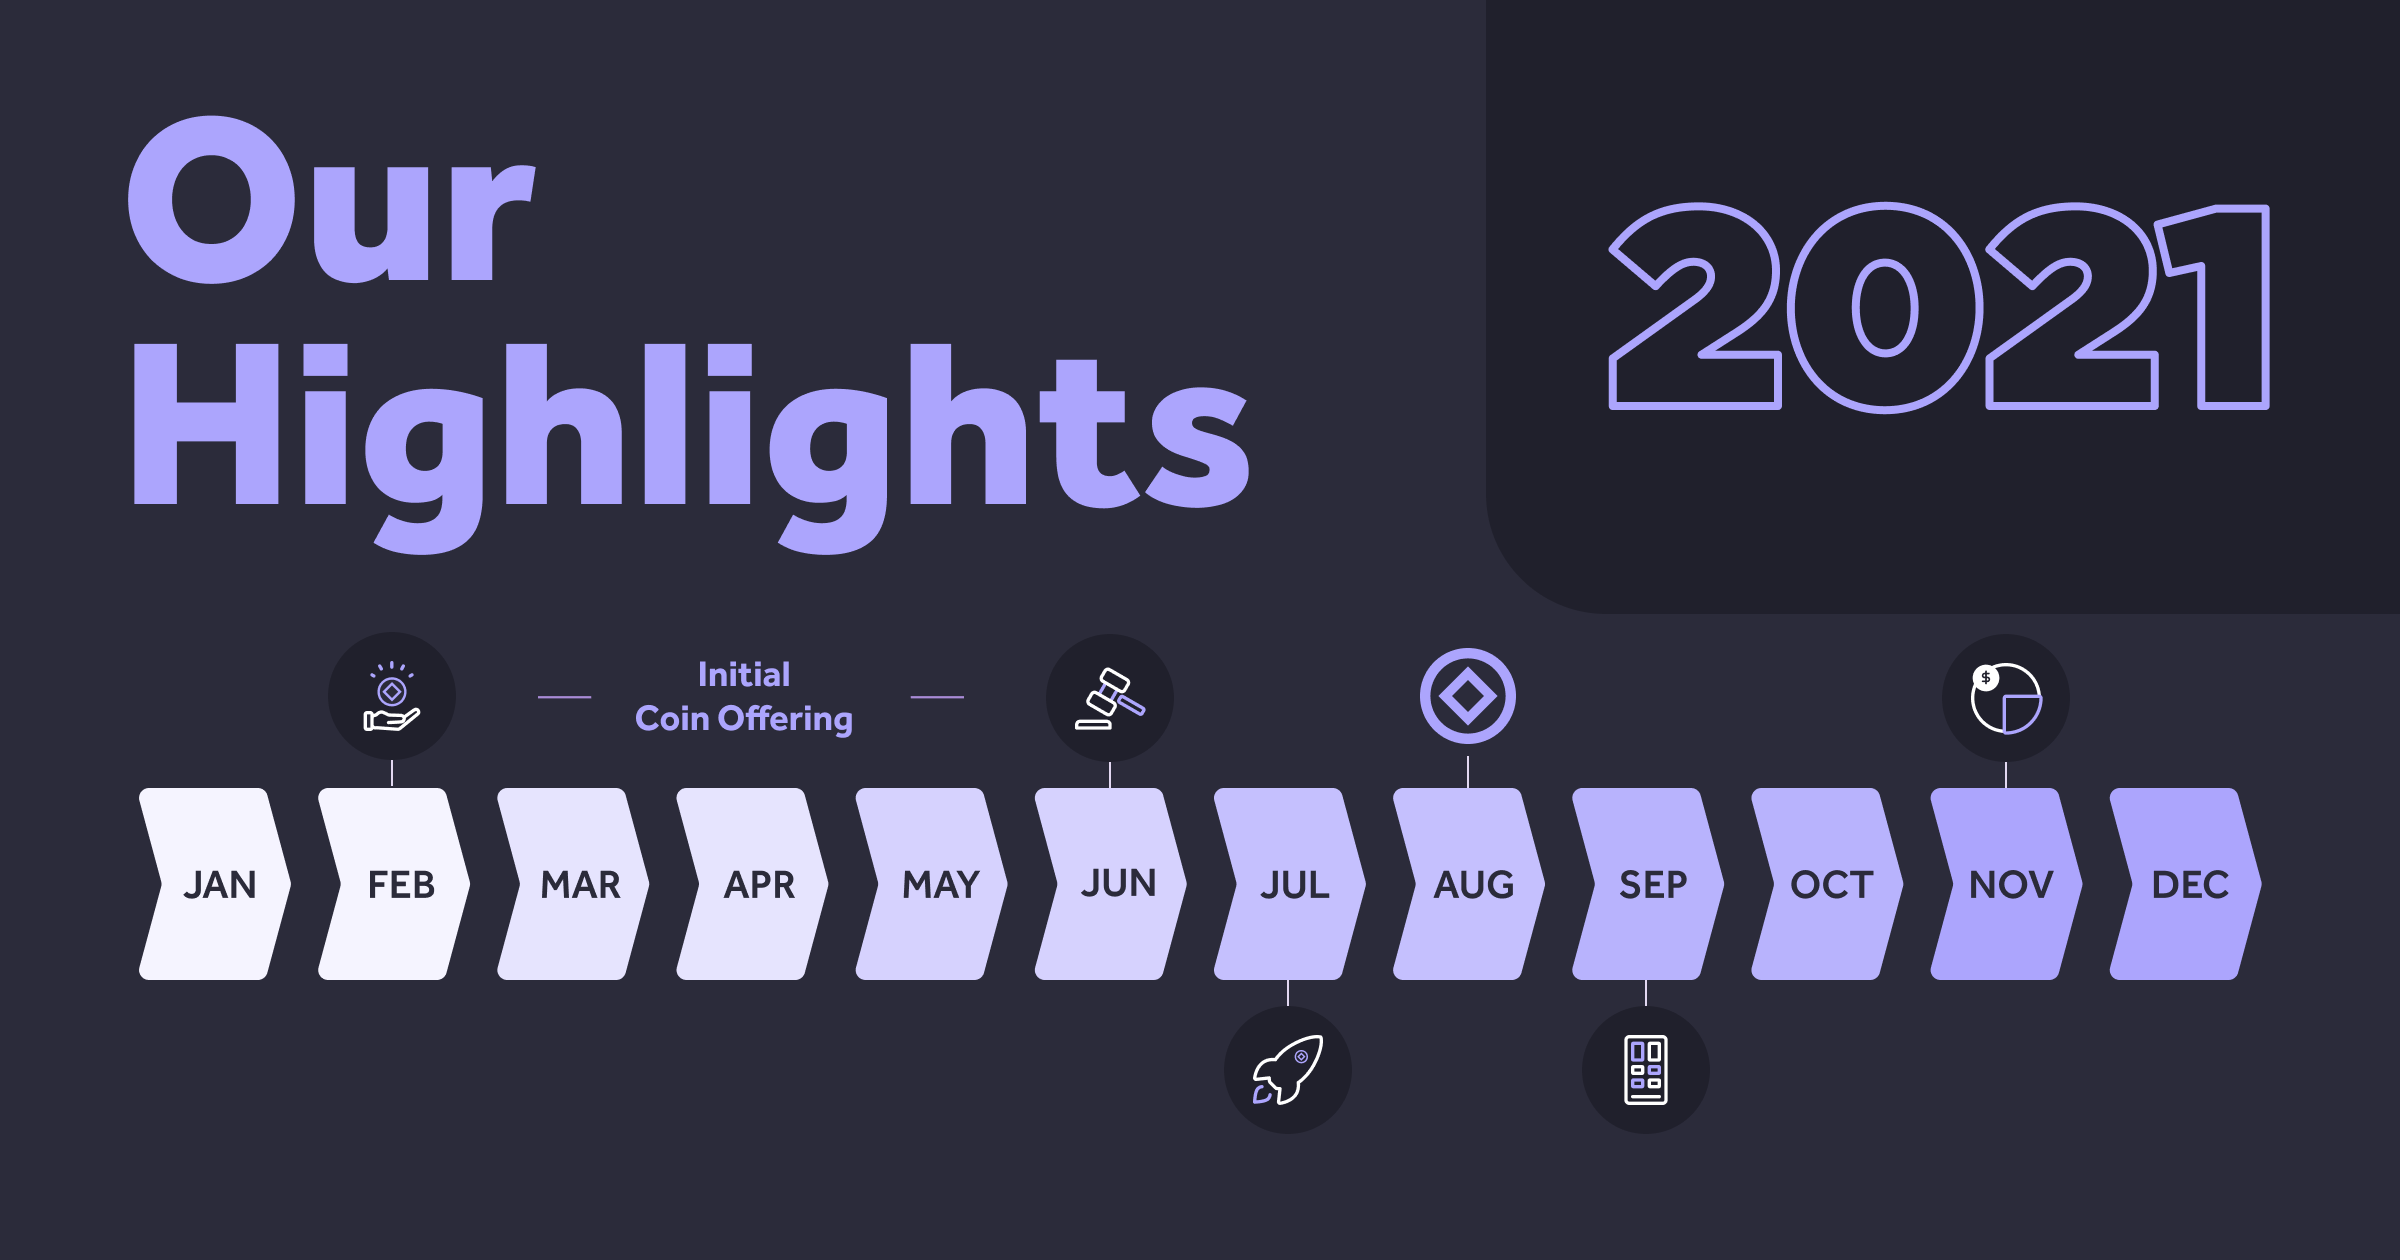 Diamonds Standard: Our Highlights in 2021